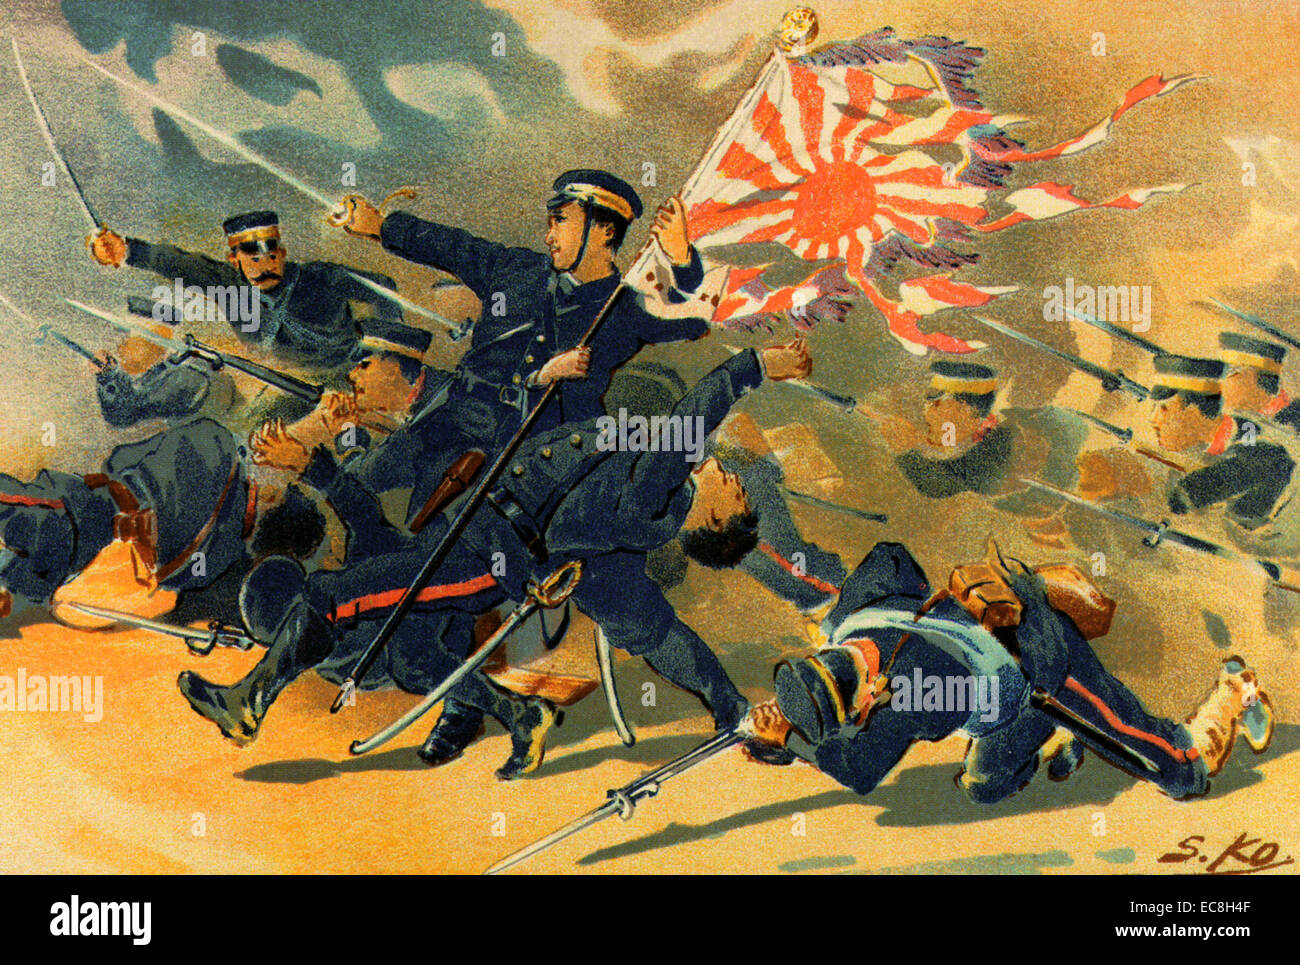 RUSSO-JAPANESE WAR 1904-1905. A Japanese print shows troops of the 1st Division of the Imperial Japanese Army at the Battle of Nanshan in May 1904 Stock Photo